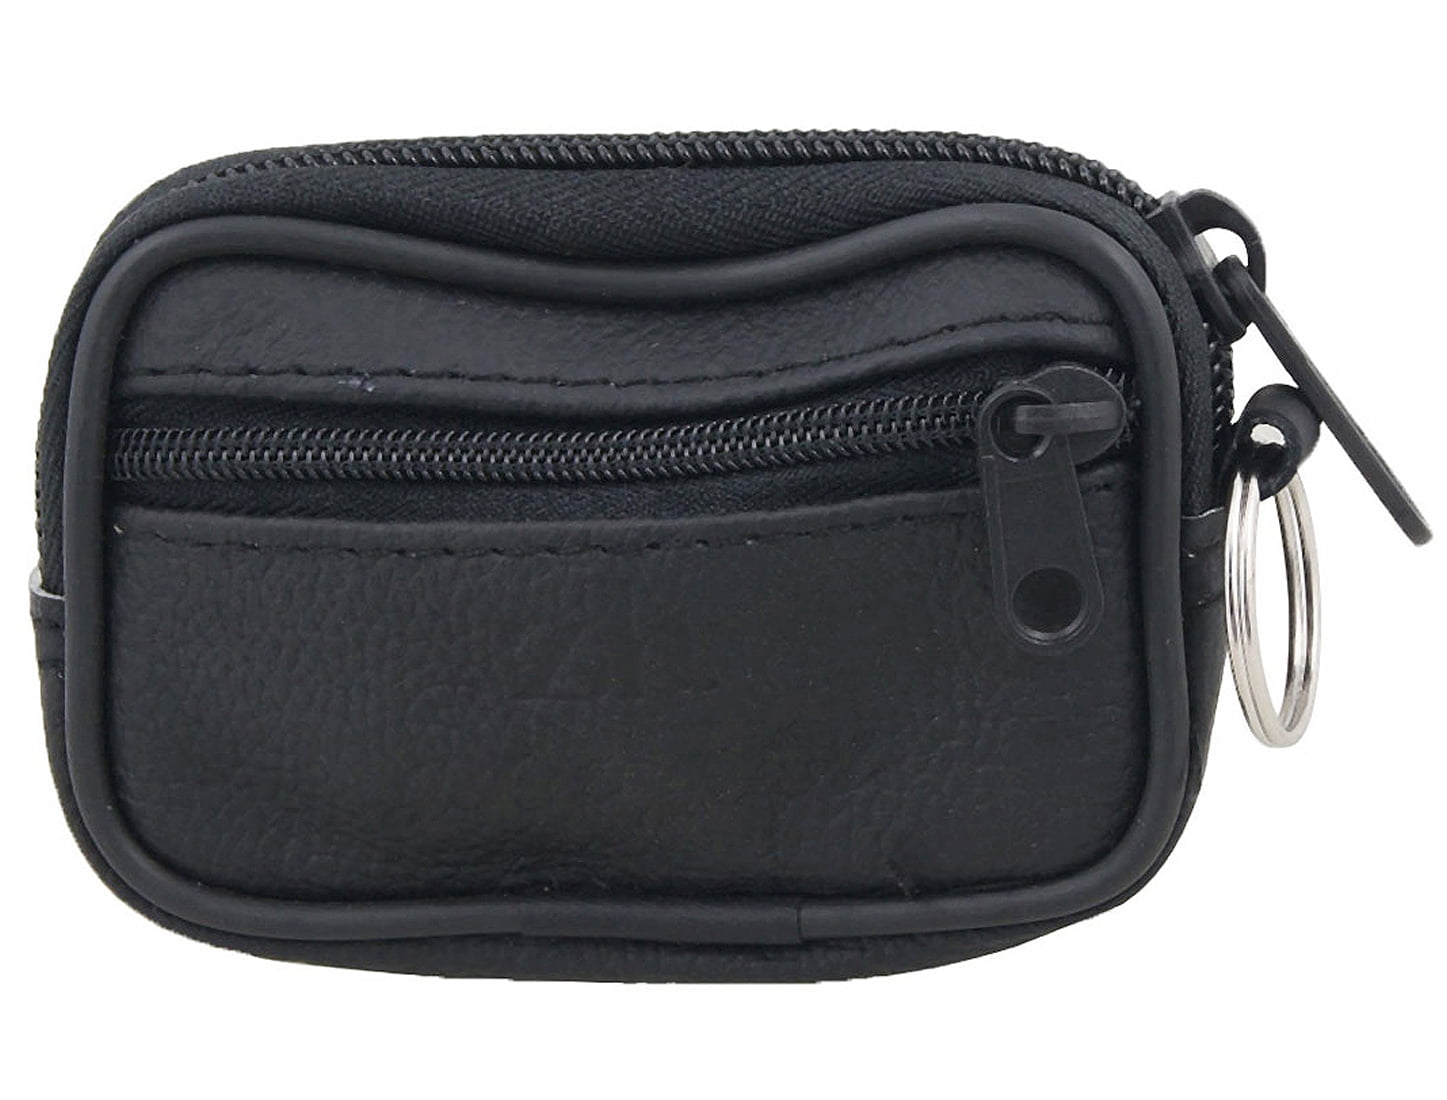 Unisex Small Black Leather Coin Pouch